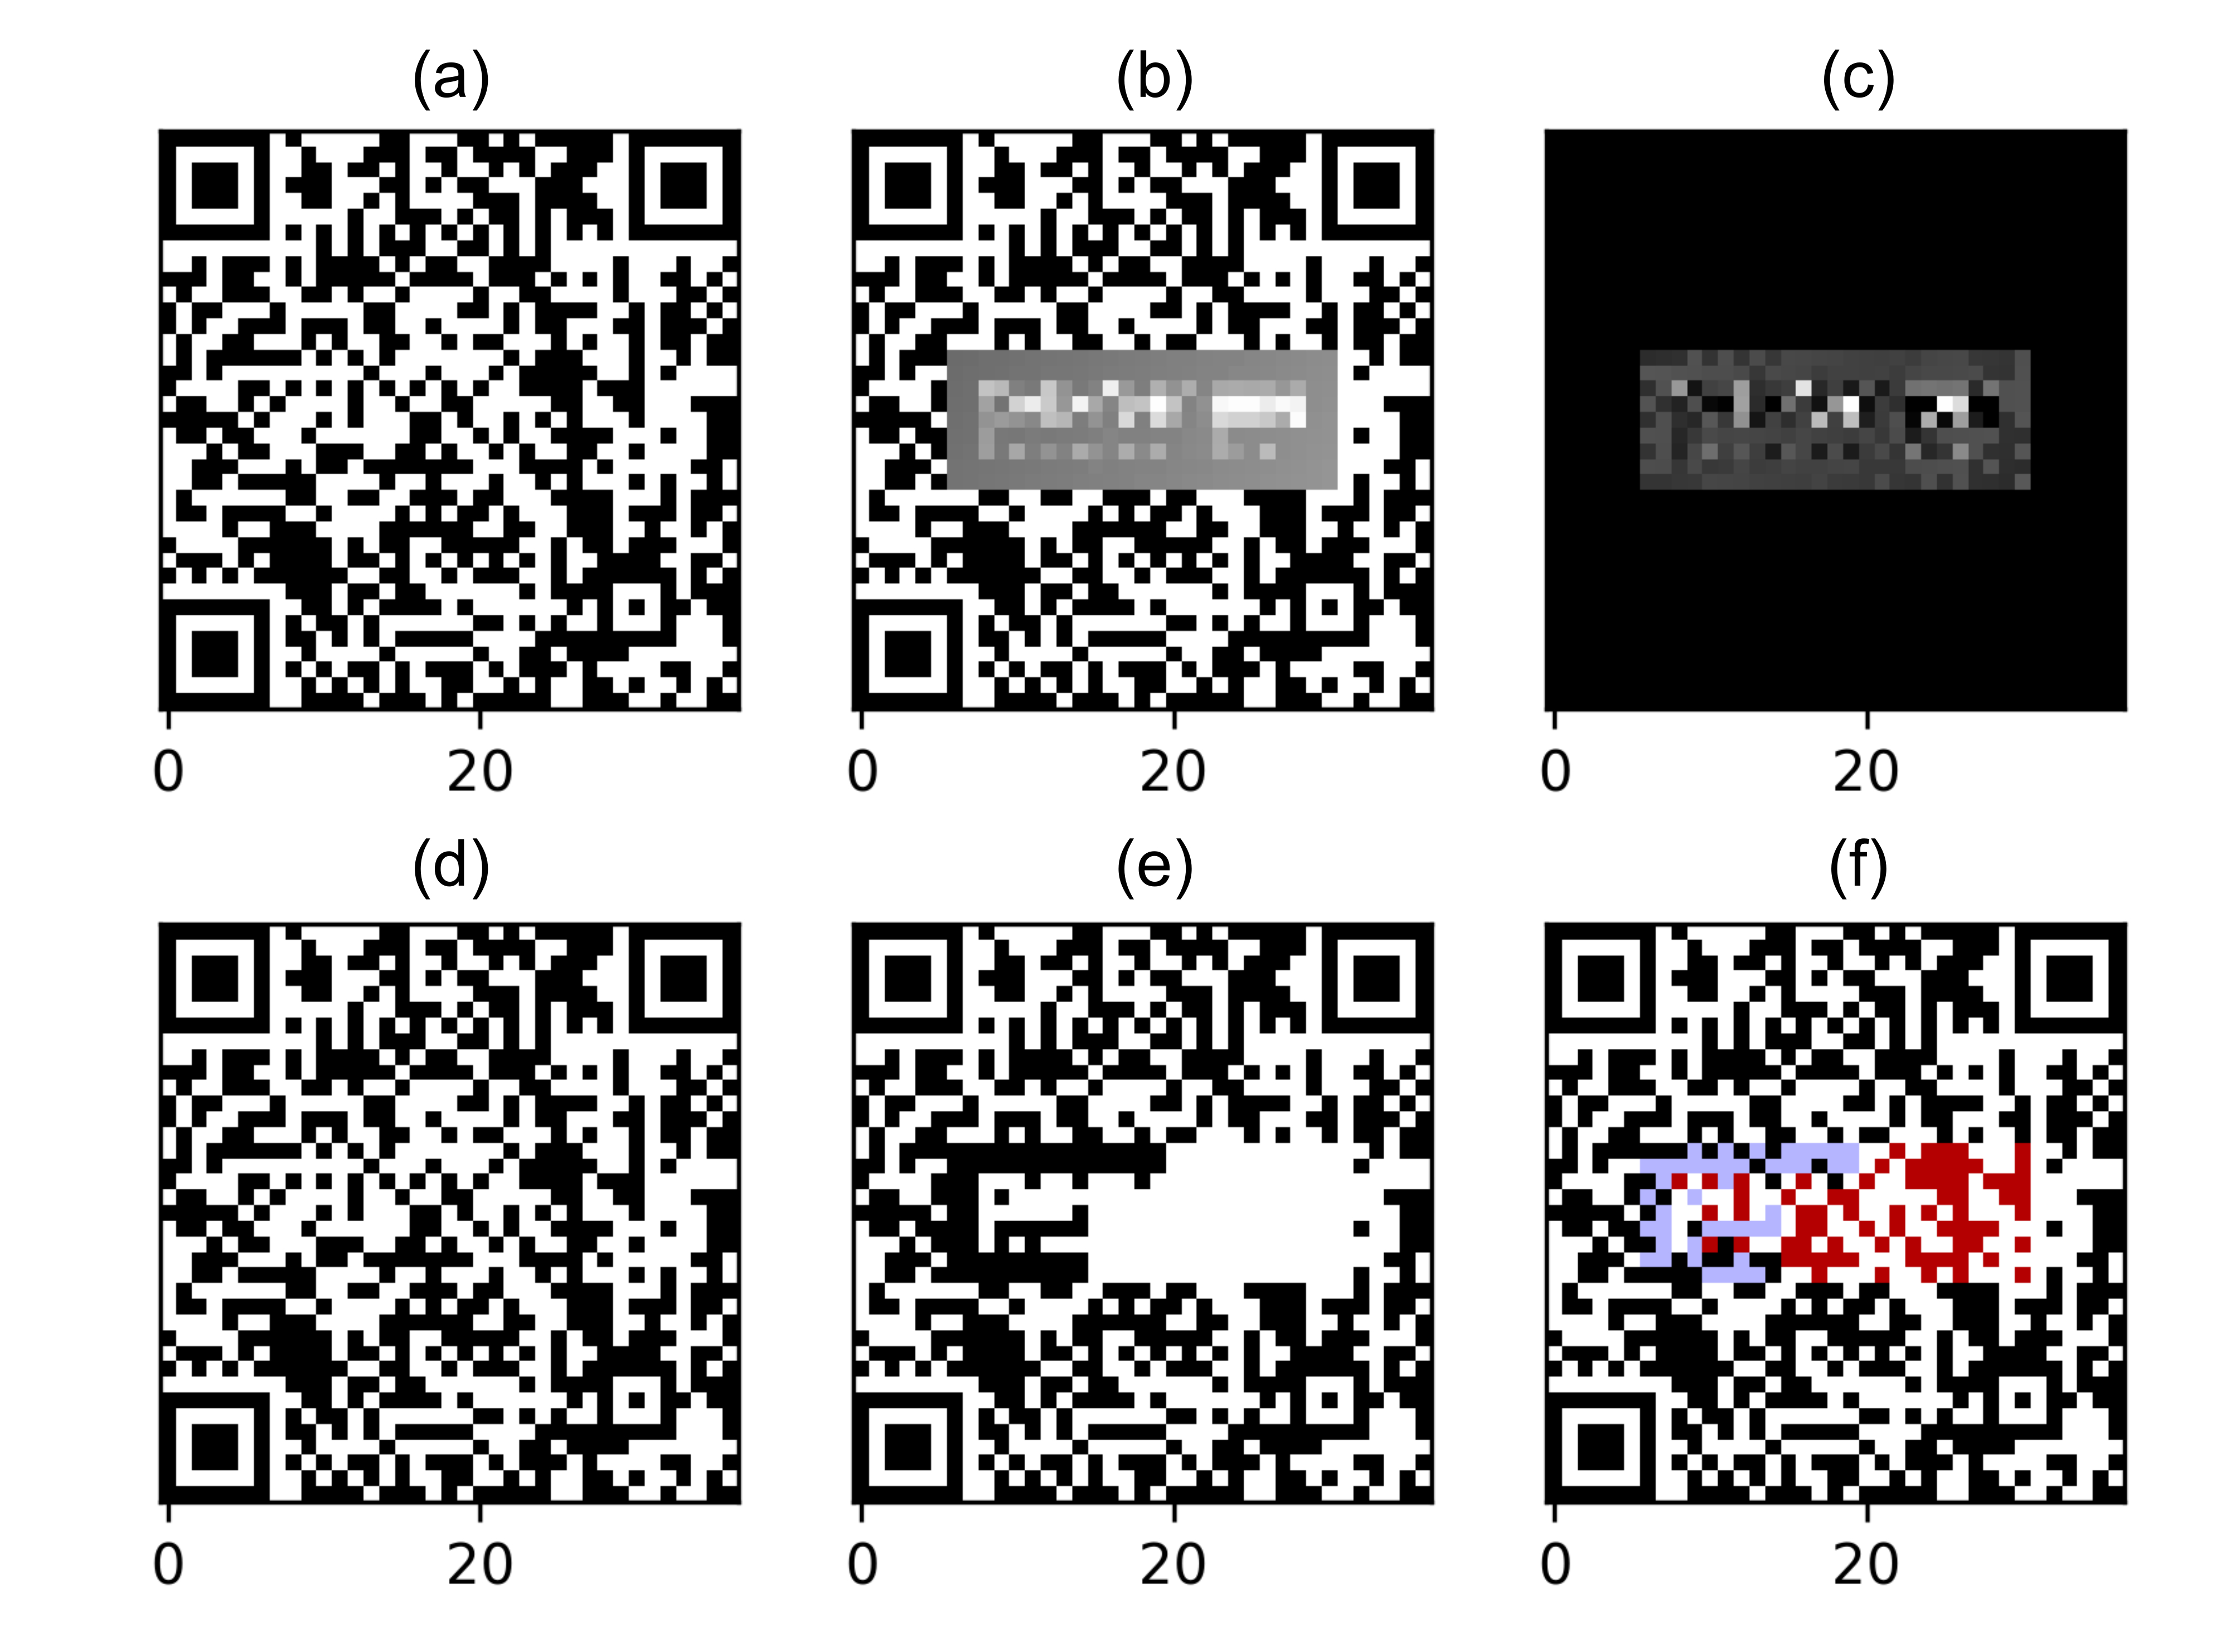 A QR Code with a logo is created and read, which accumulates error due to the presence of the logo. (a) The original QR Code encoded. (b) The captured sampled grayscale QR Code. (c) The power difference between (a) and (b). (d) The original grayscale QR Code encoded is binarized, which it is represented exactly as (a). (e) The captured sampled grayscale image from (b) is binarized. (f) The difference between (d) and (e) is shown: light blue pixels correspond to white pixels turned into black by the logo, and dark blue pixels correspond to black pixels turned into white by the logo.